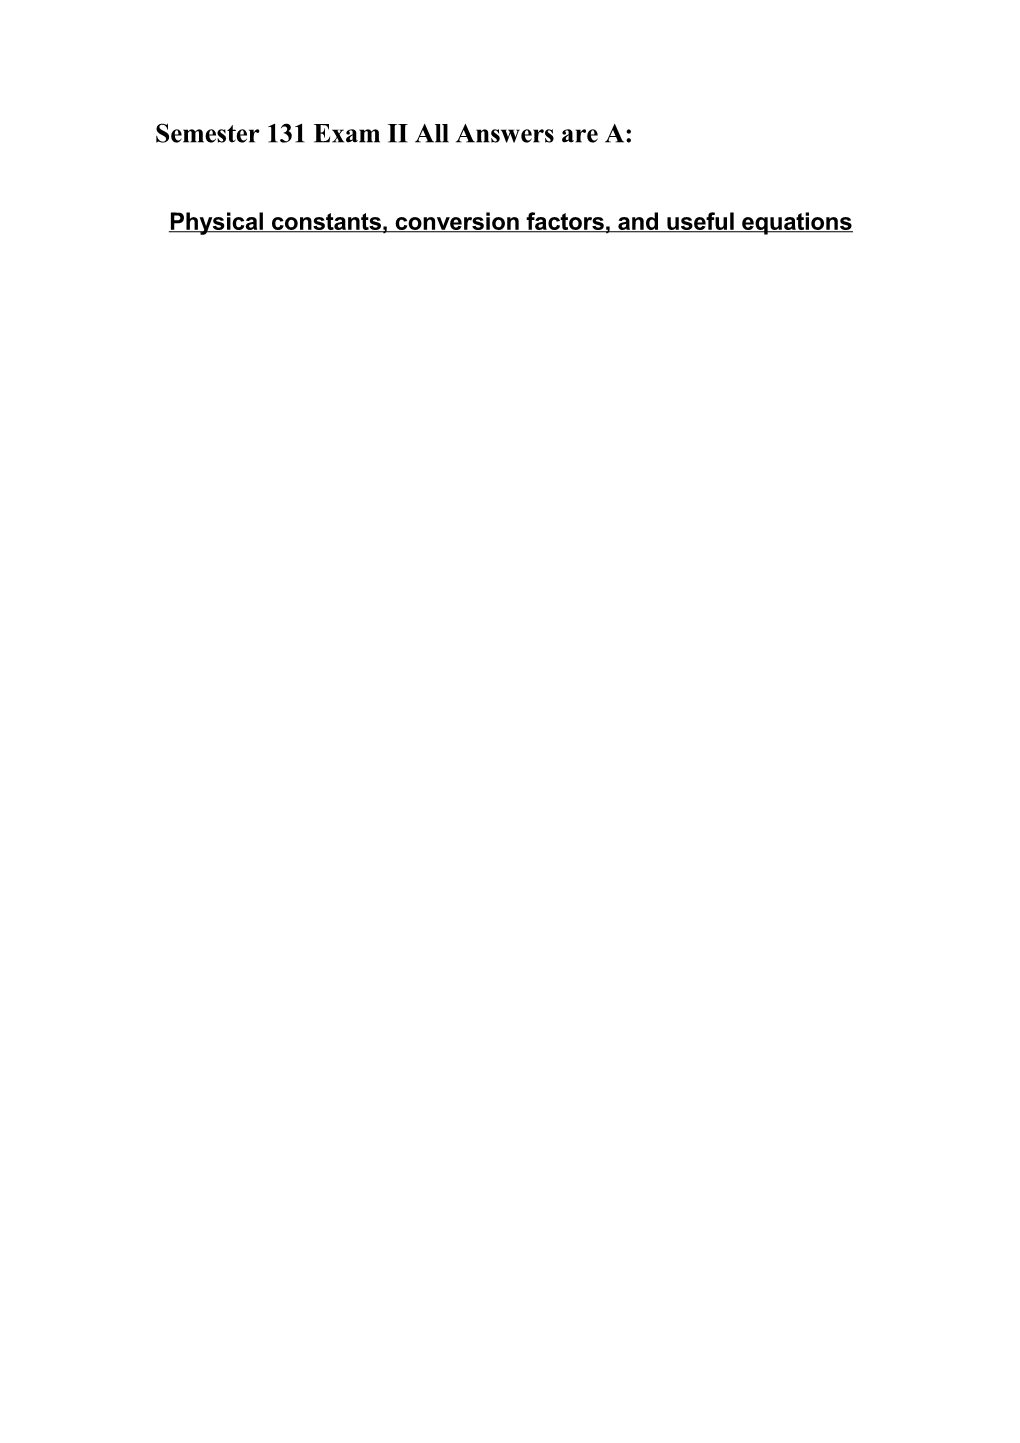 Physical Constants, Conversion Factors, and Useful Equations